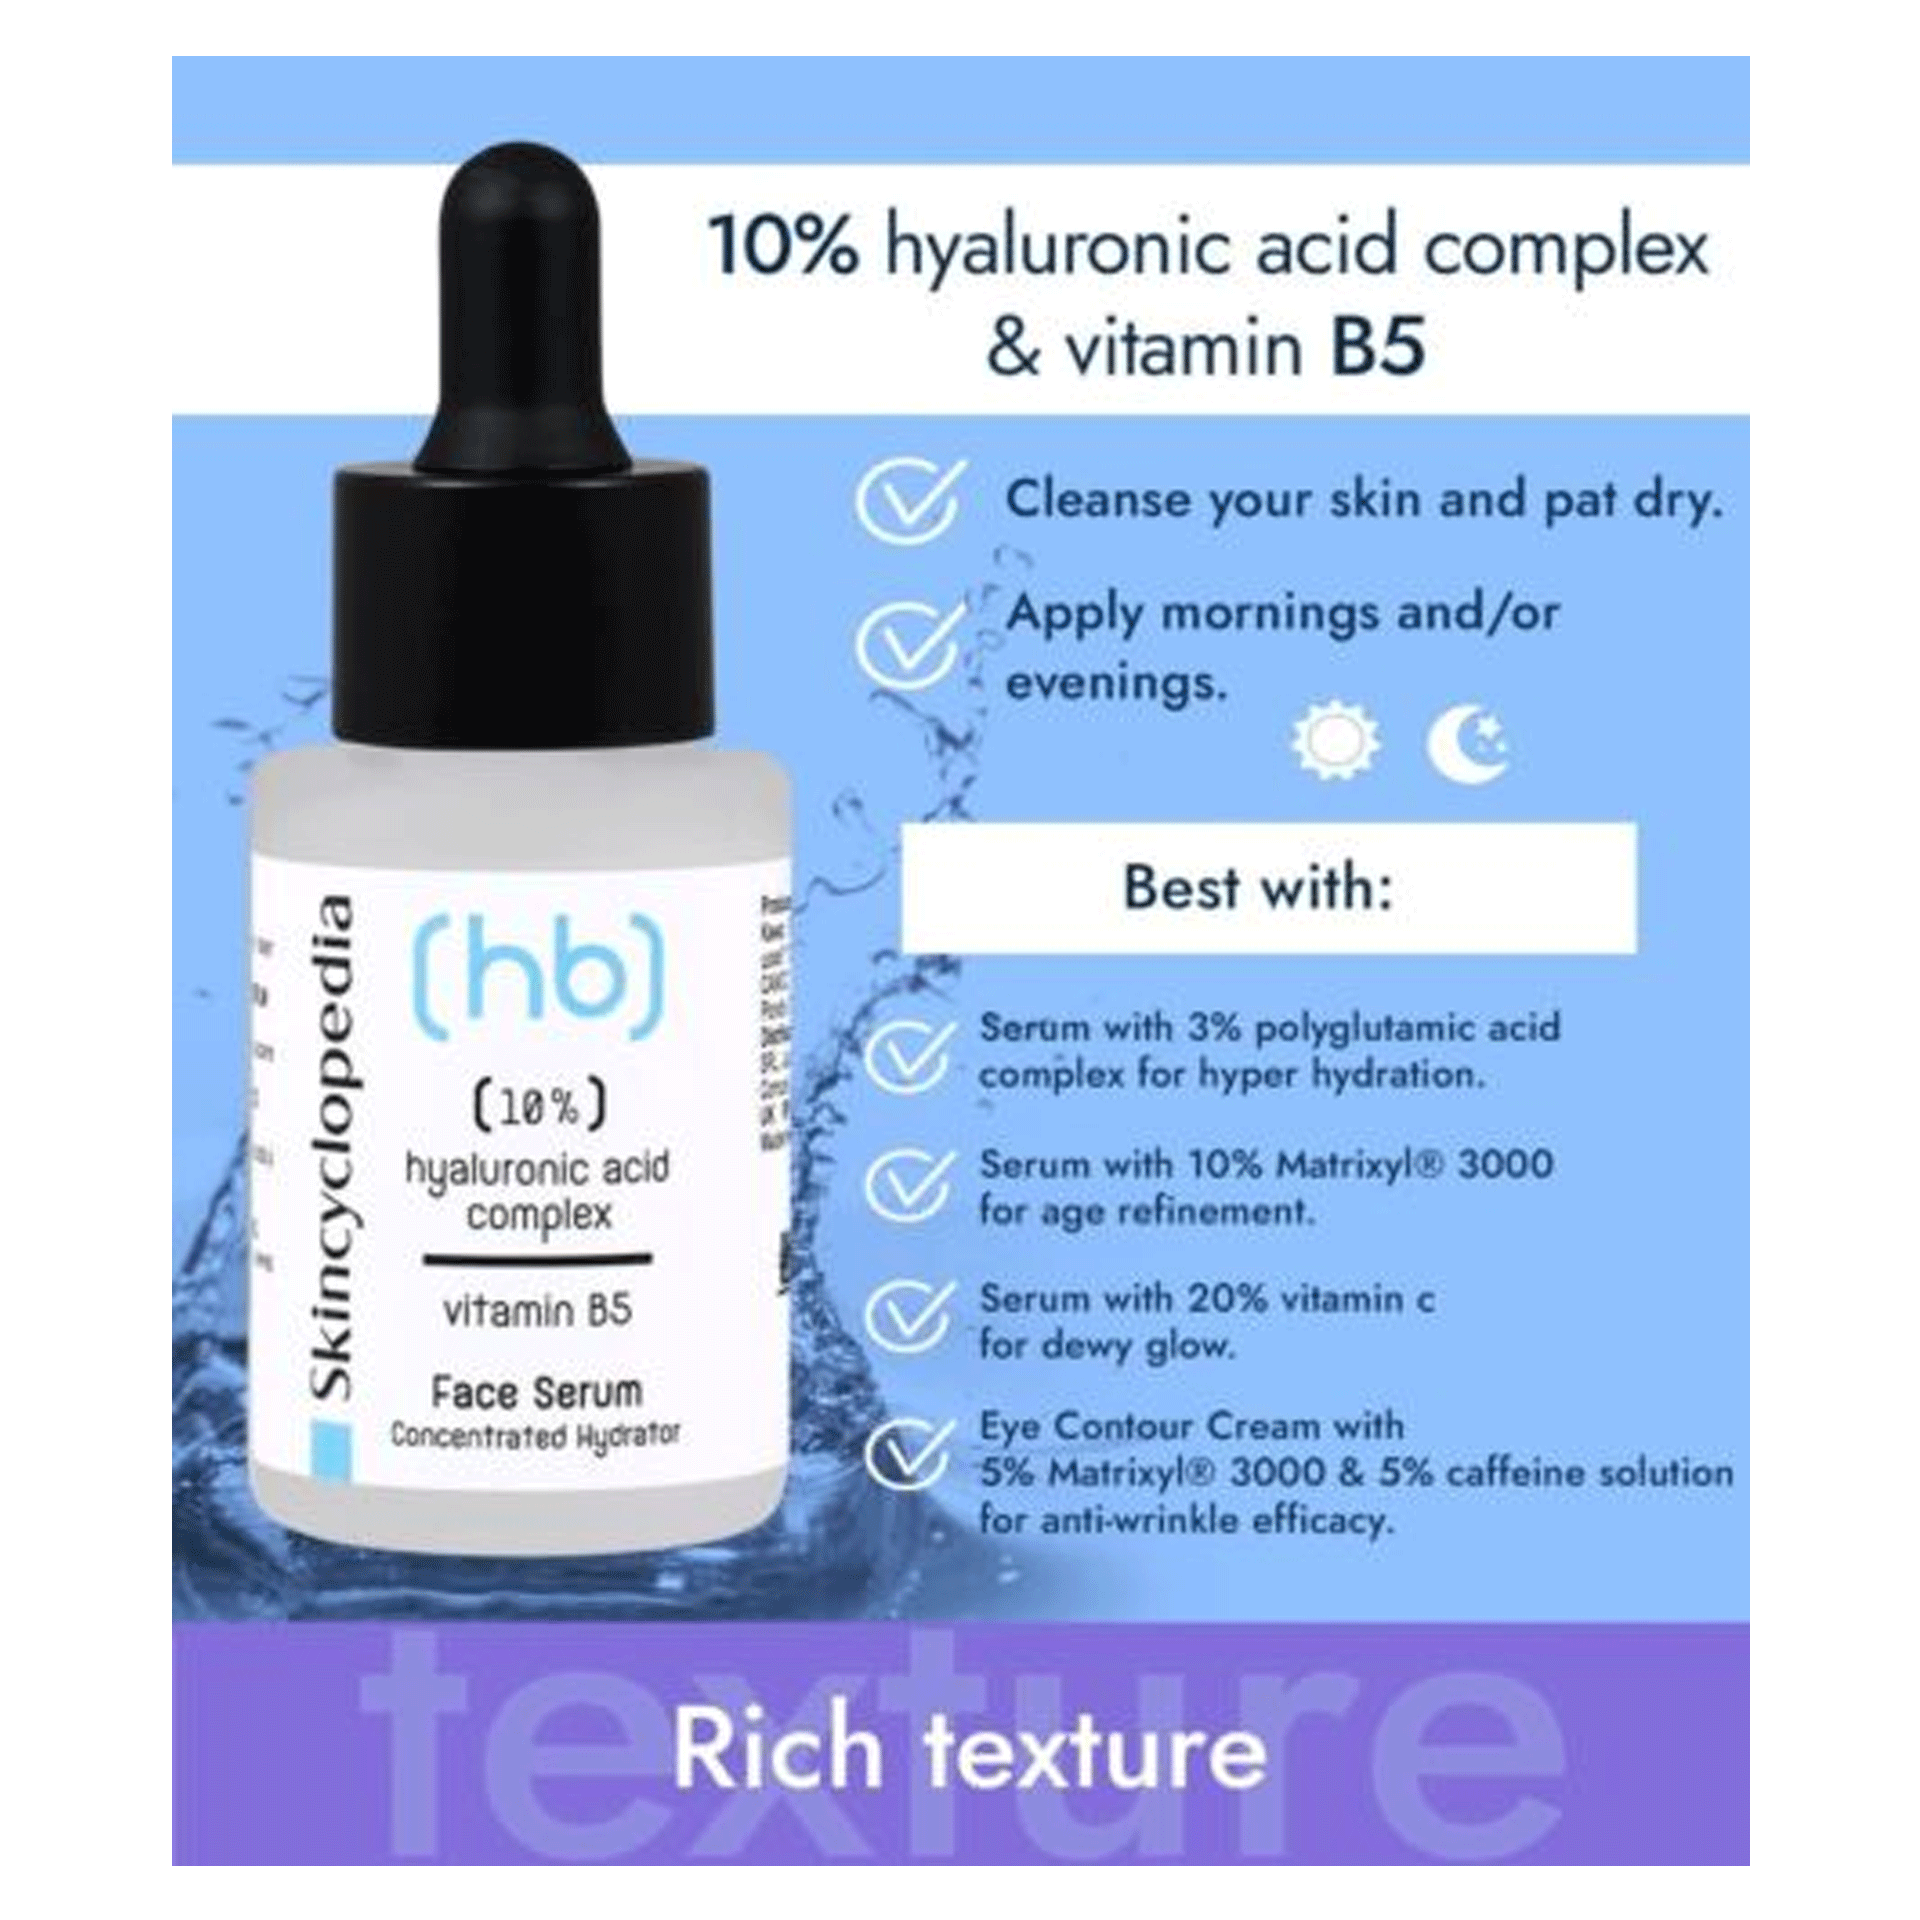 Hb Skincyclopedia Face Serum Concentrated Hydrator, 30ml